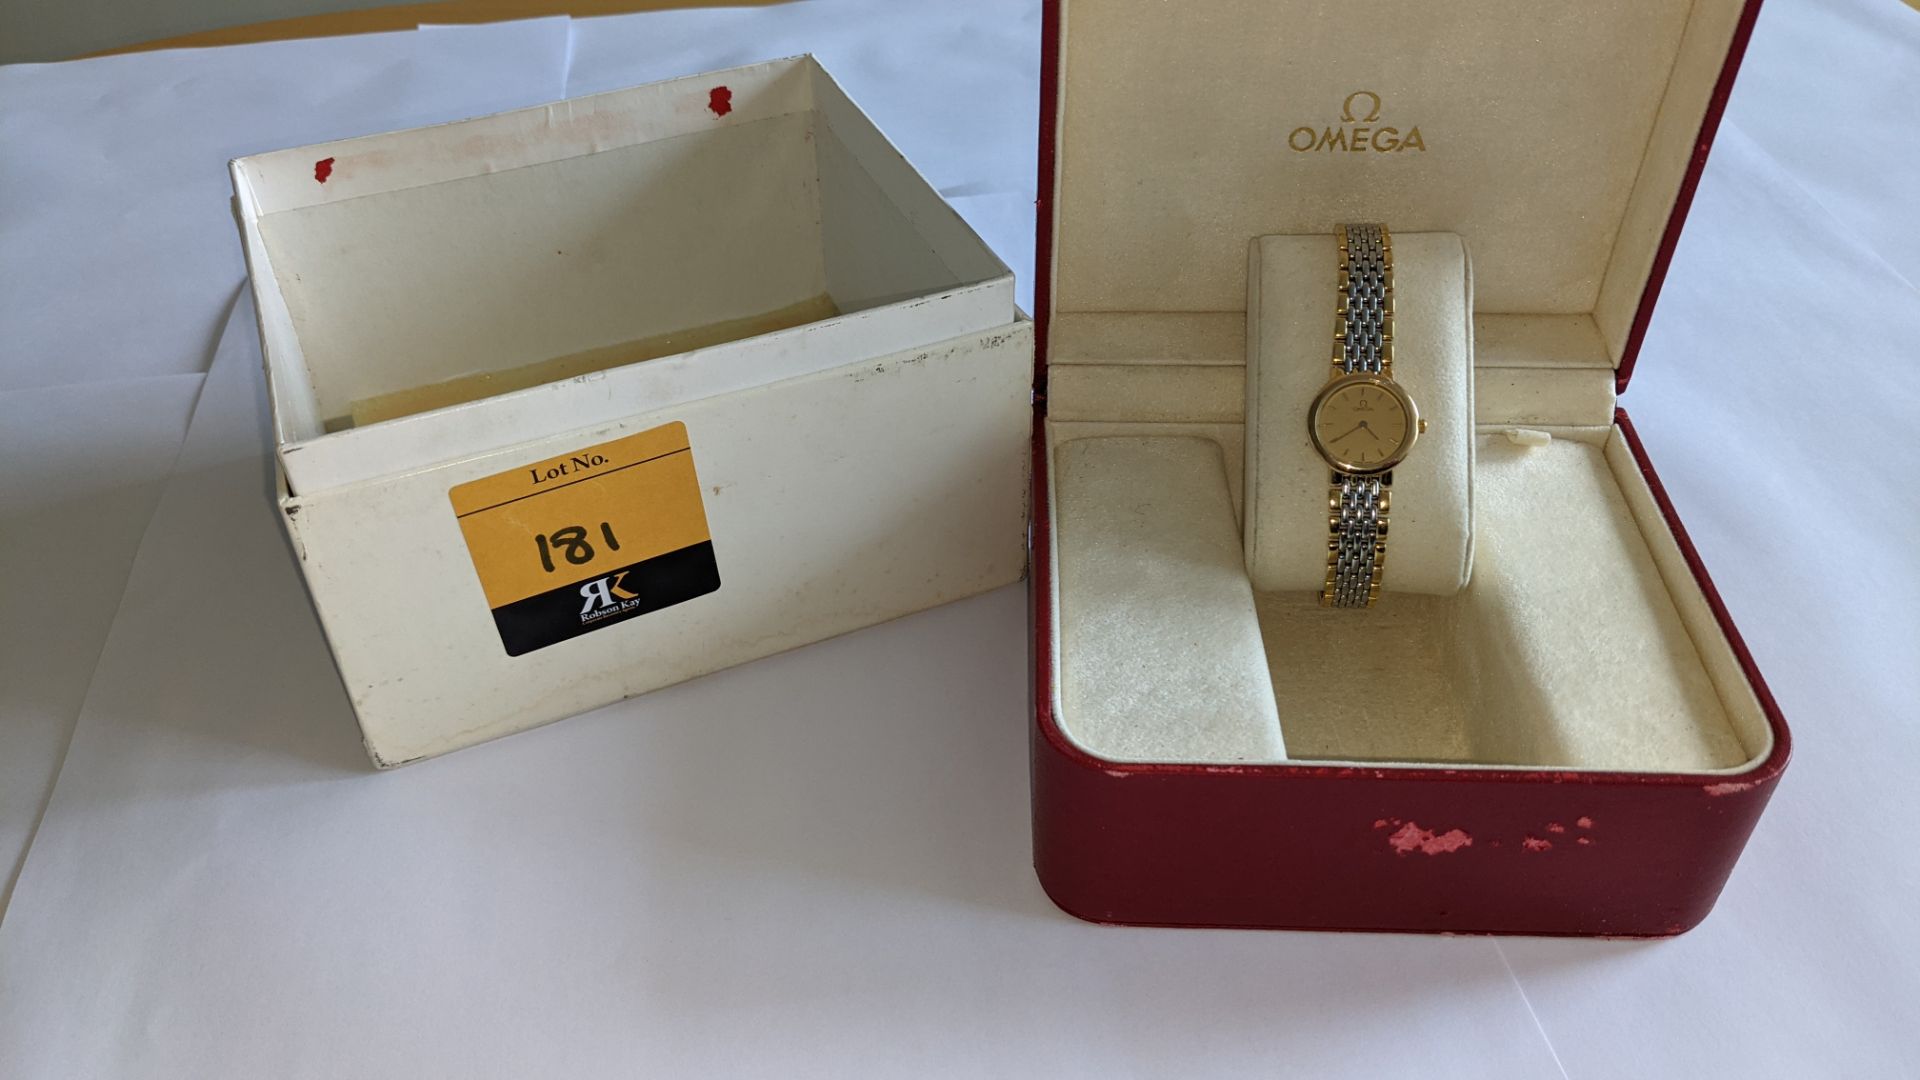 Omega De Ville lady's wristwatch in 2-tone finish including Omega red box & white cardboard outer bu - Image 5 of 17